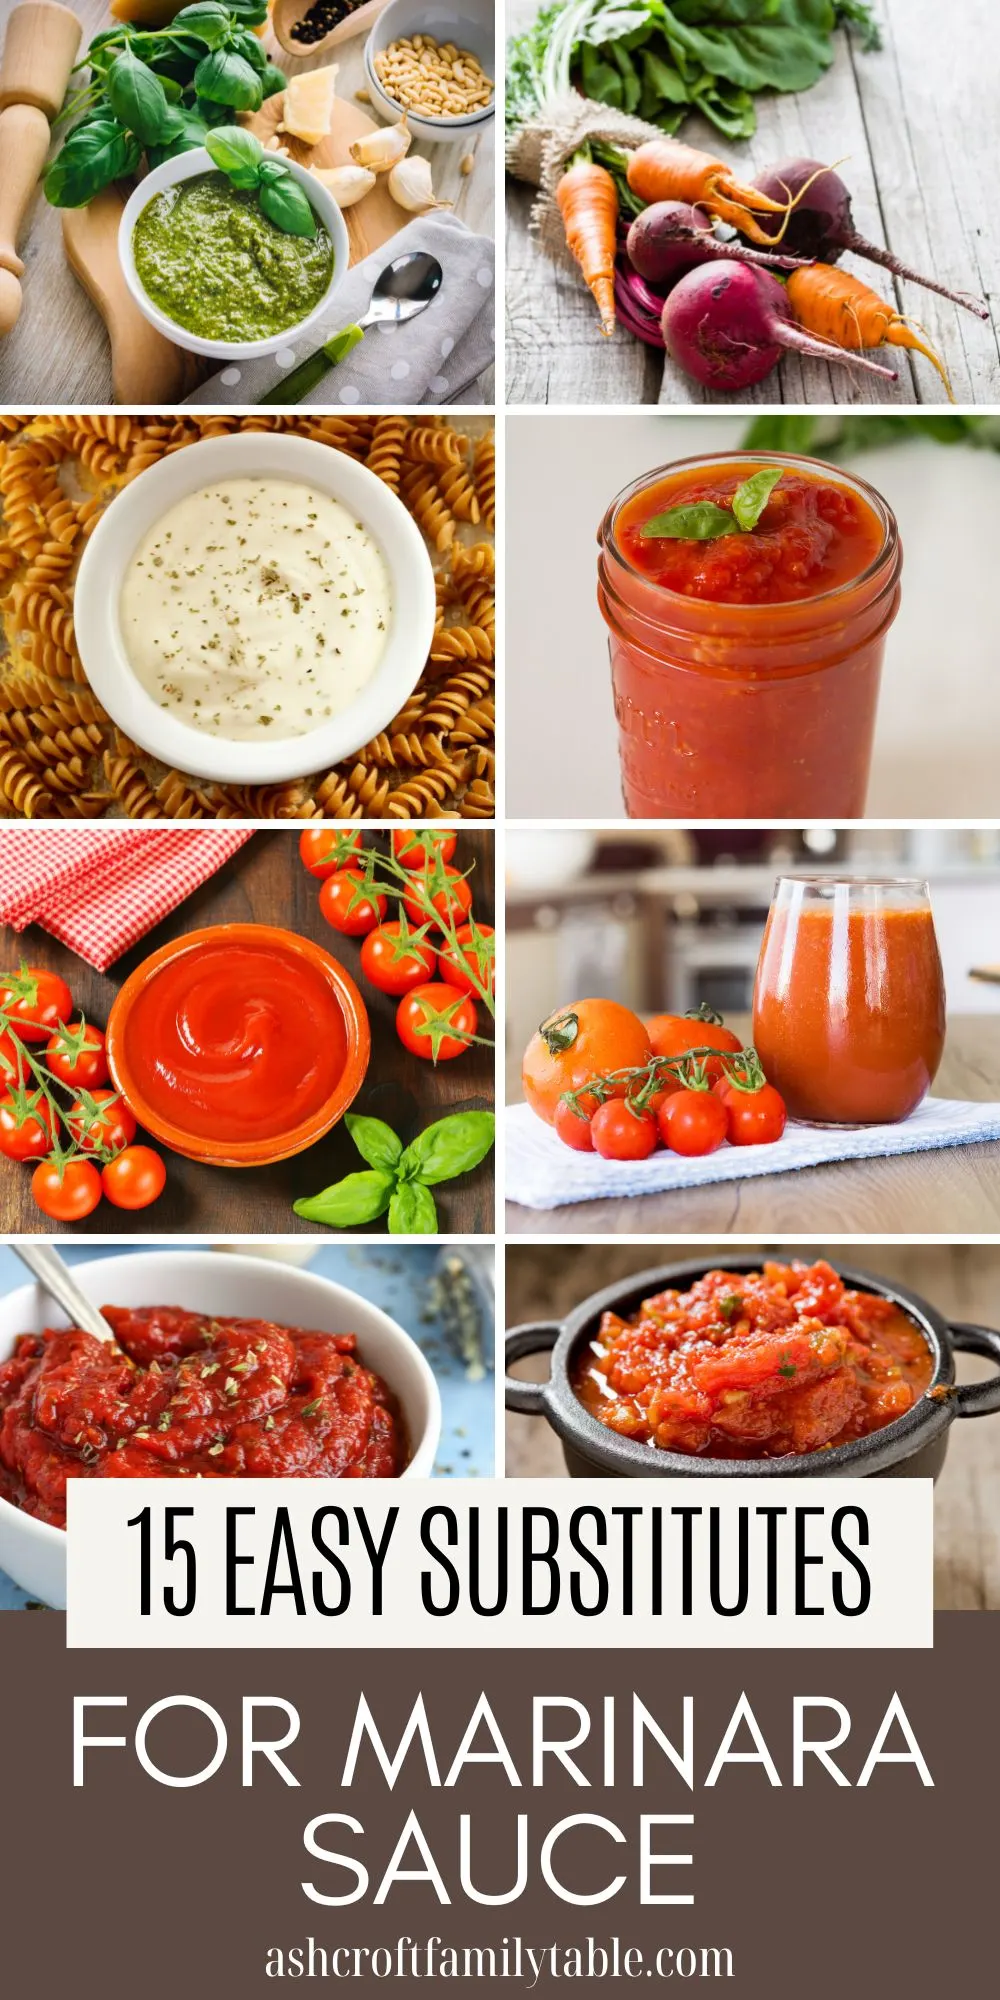 Pinterest graphic with text and collage of ingredients used to substitute for marinara sauce.